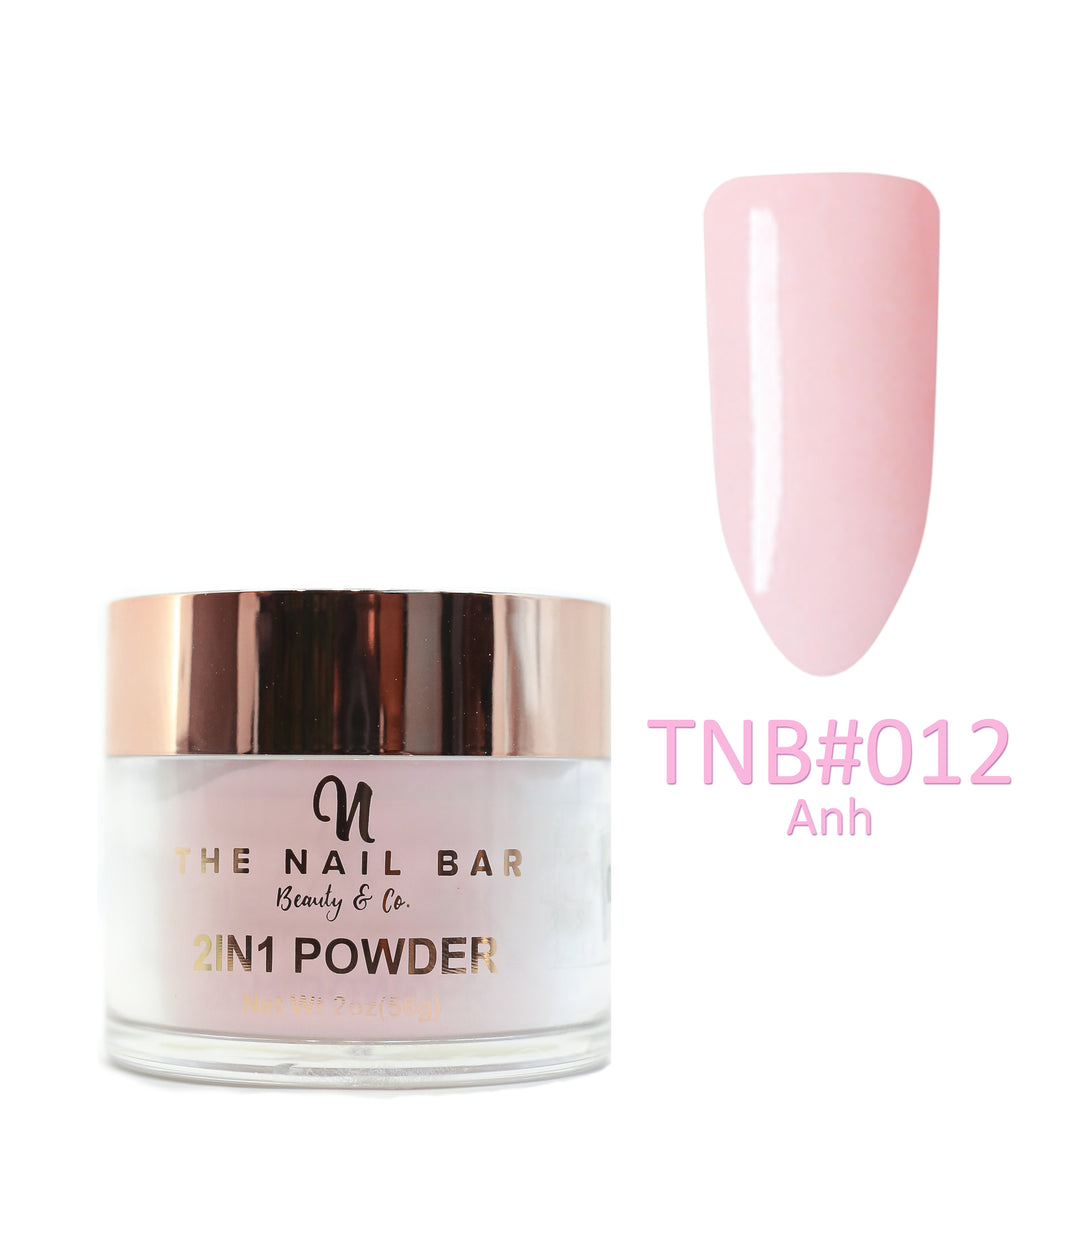 2-In-1 Dipping/Acrylic colour powder (2oz) -Anh - The Nail Bar Beauty & Co.